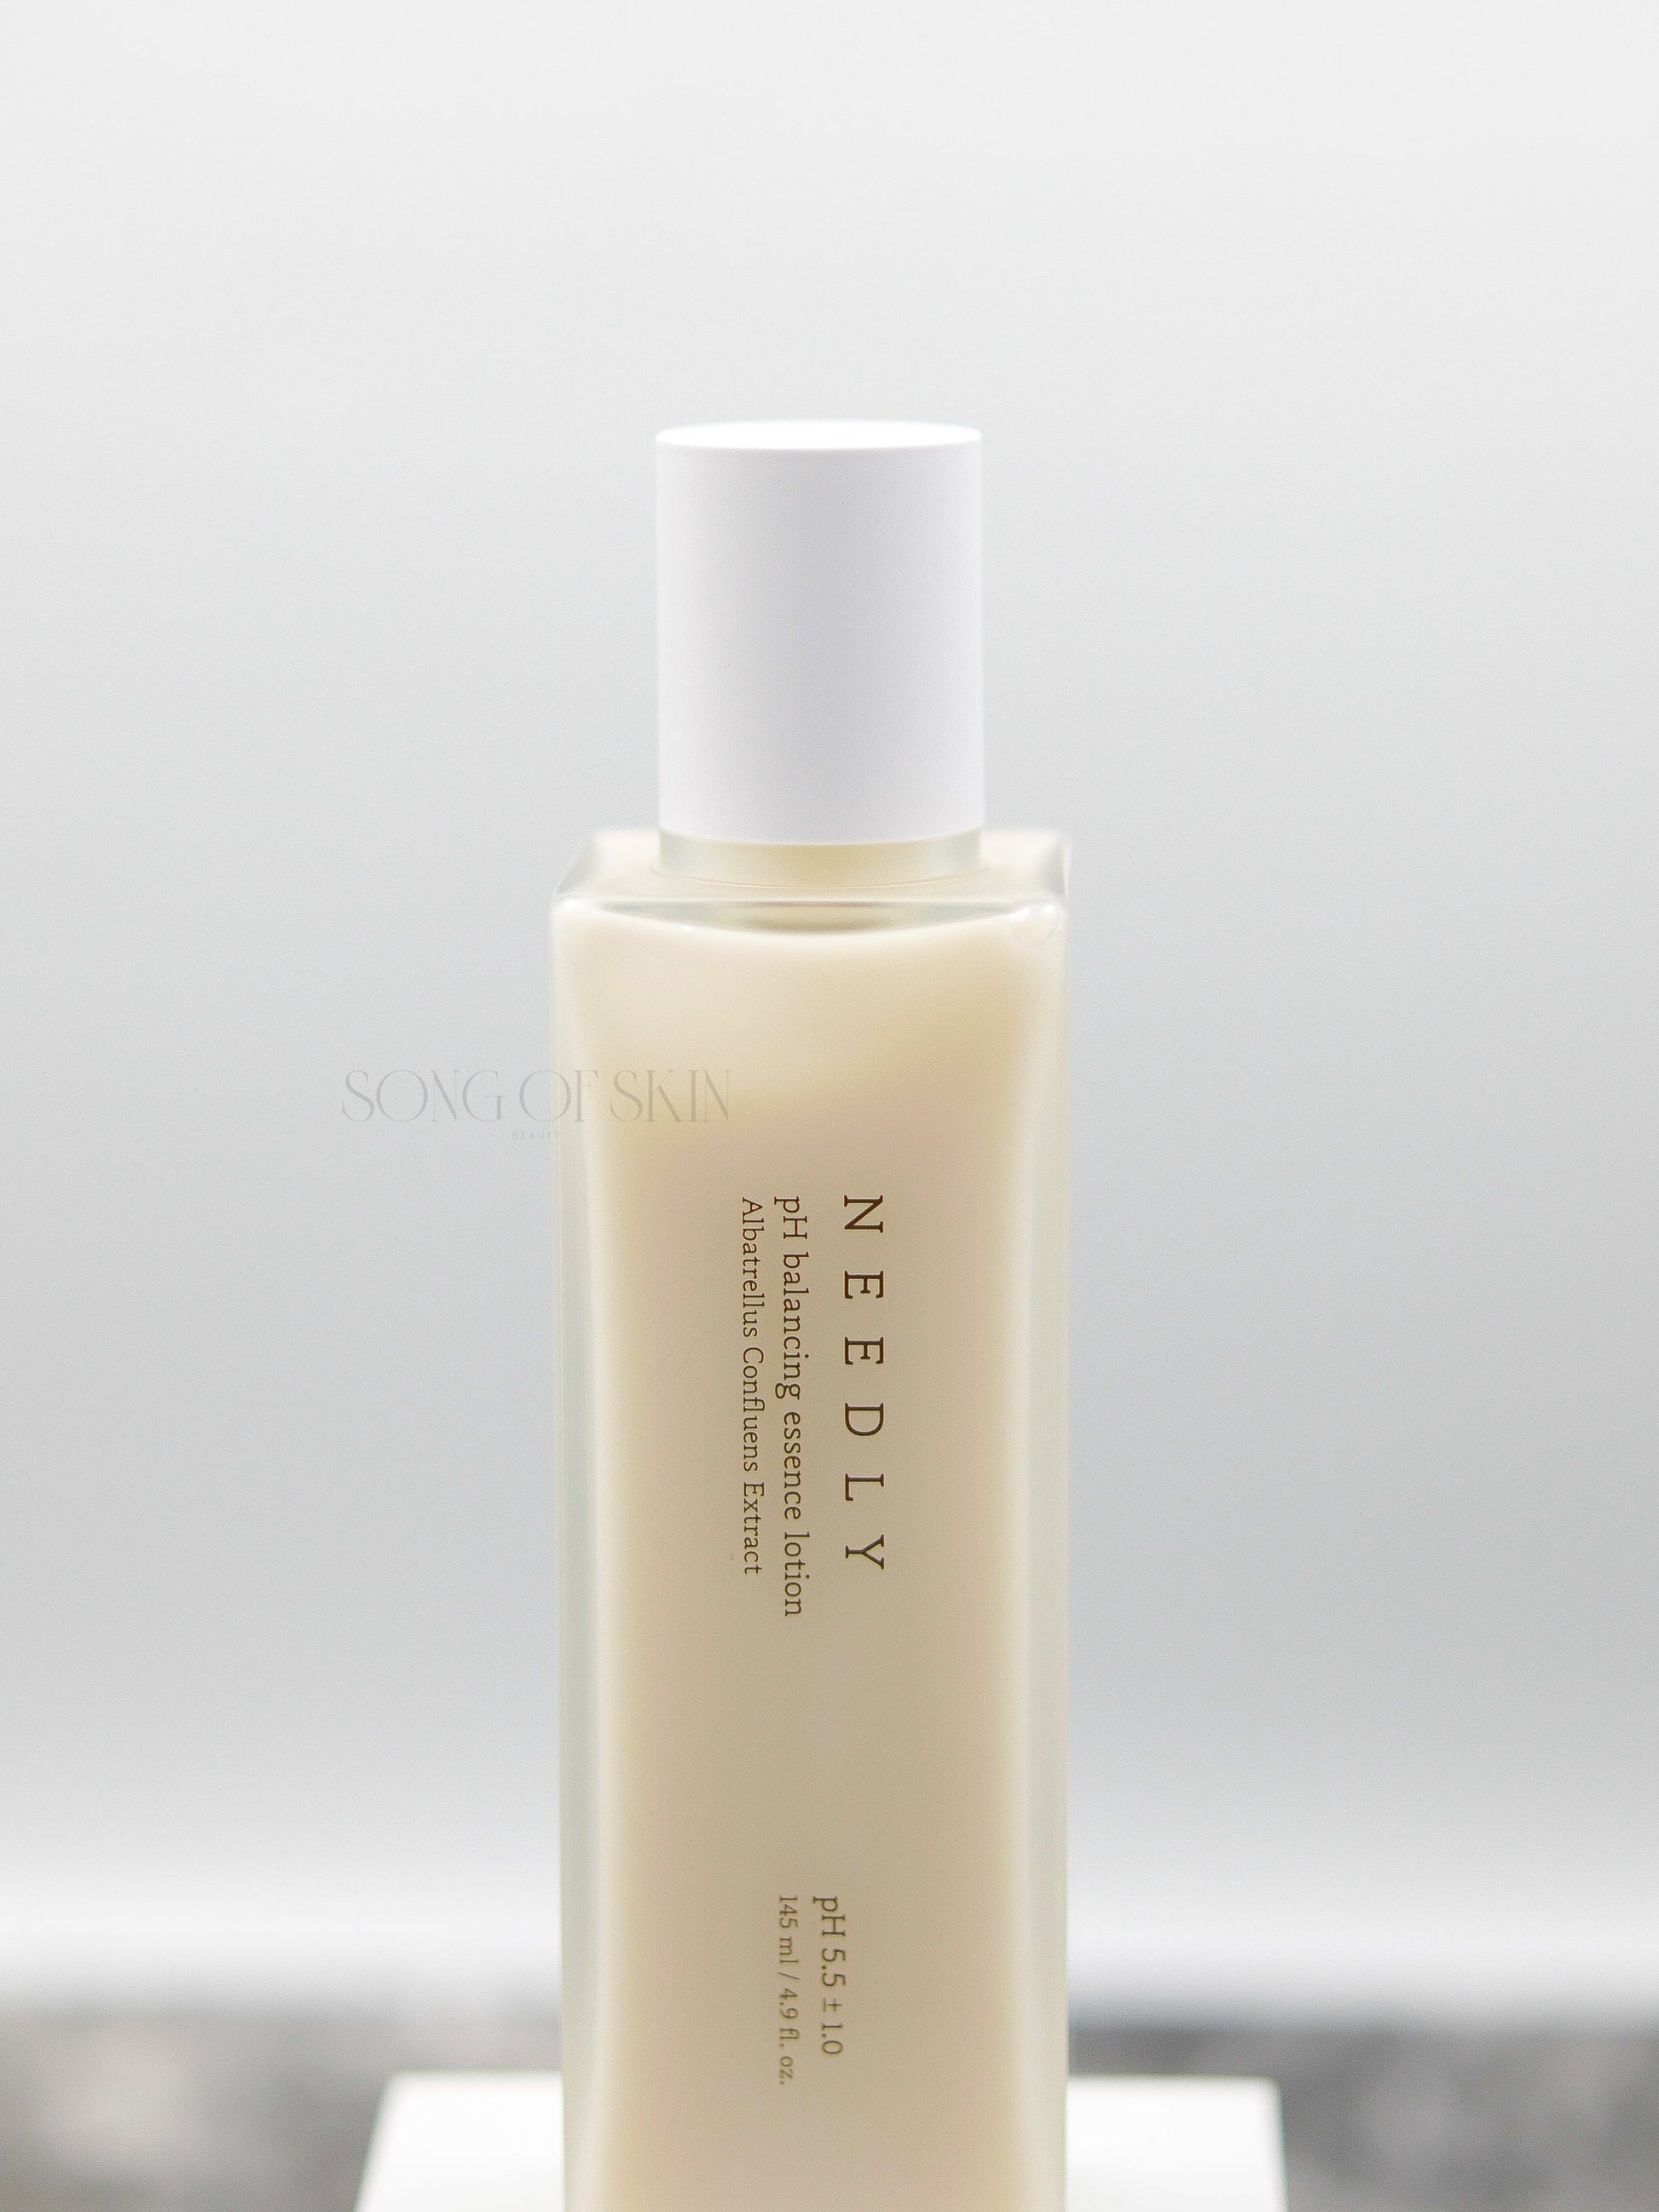 Needly pH Essence Lotion | Song of Skin